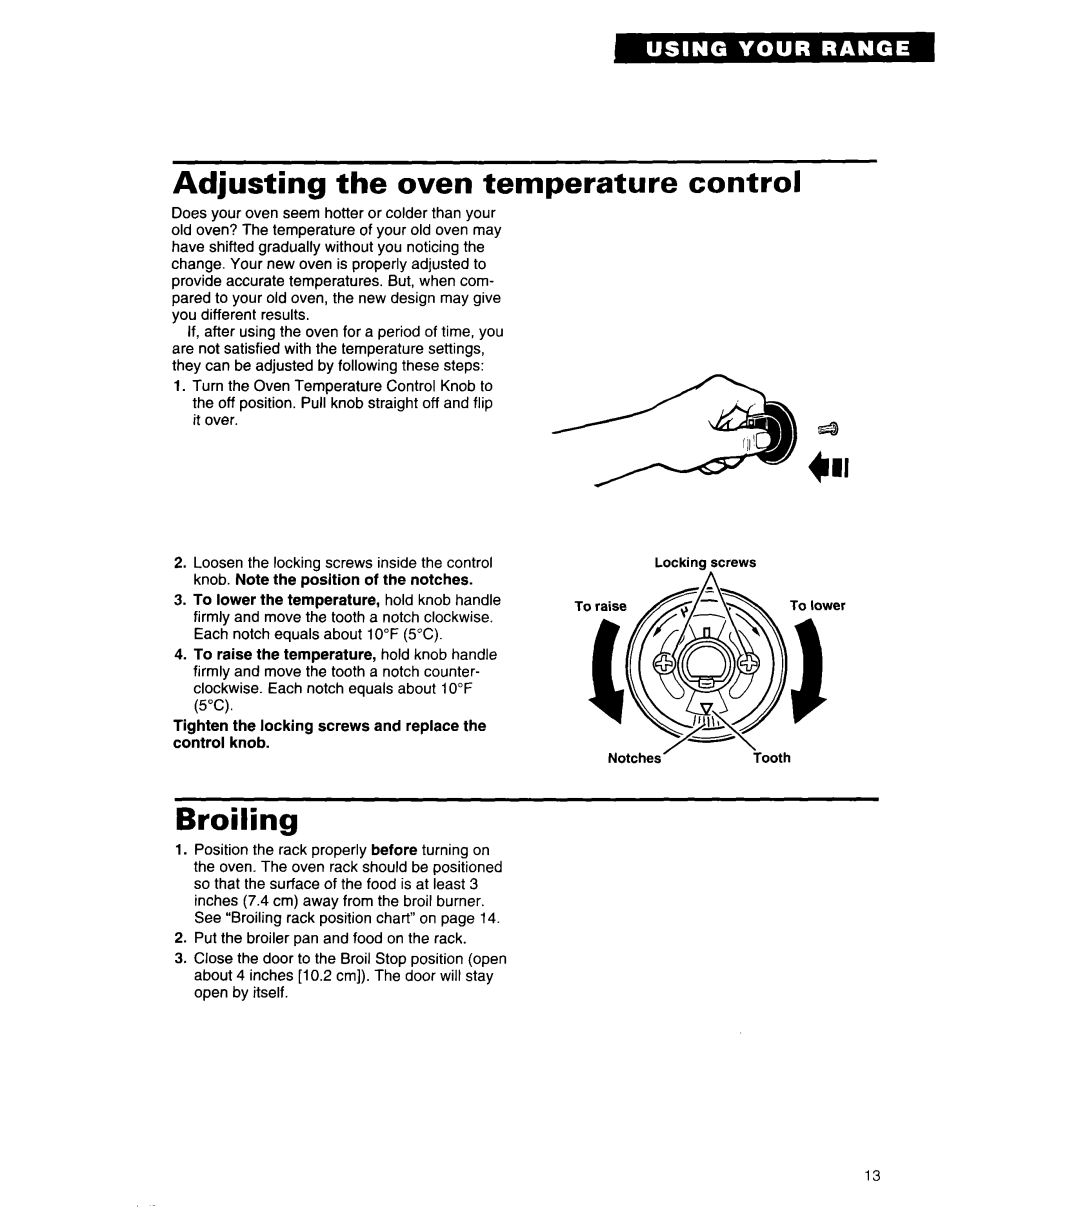 Whirlpool RE960PXY important safety instructions Adjusting the oven temperature control, Broiling 